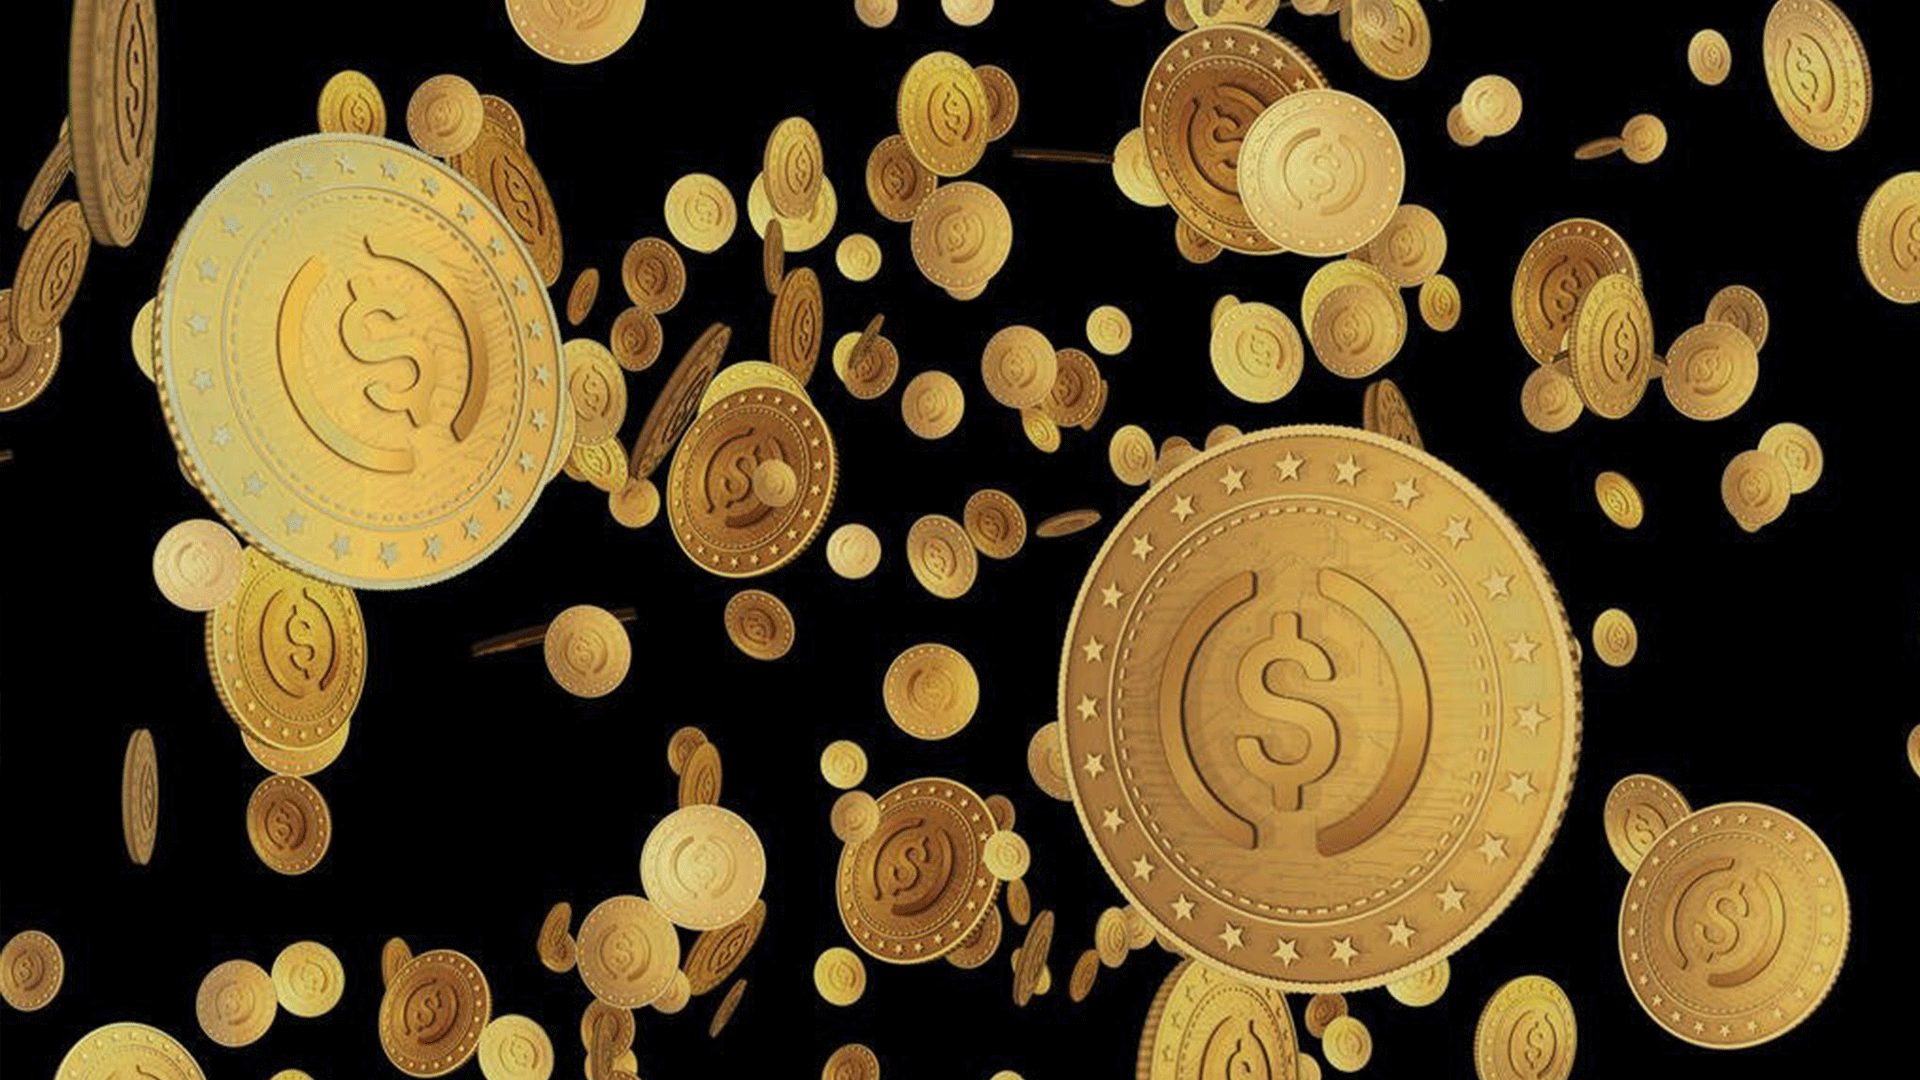  The value of stablecoins in circulation rose to $157 billion USD by the end of 2021, compared with $5.6 billion at the beginning of 2020. © Shutterstock